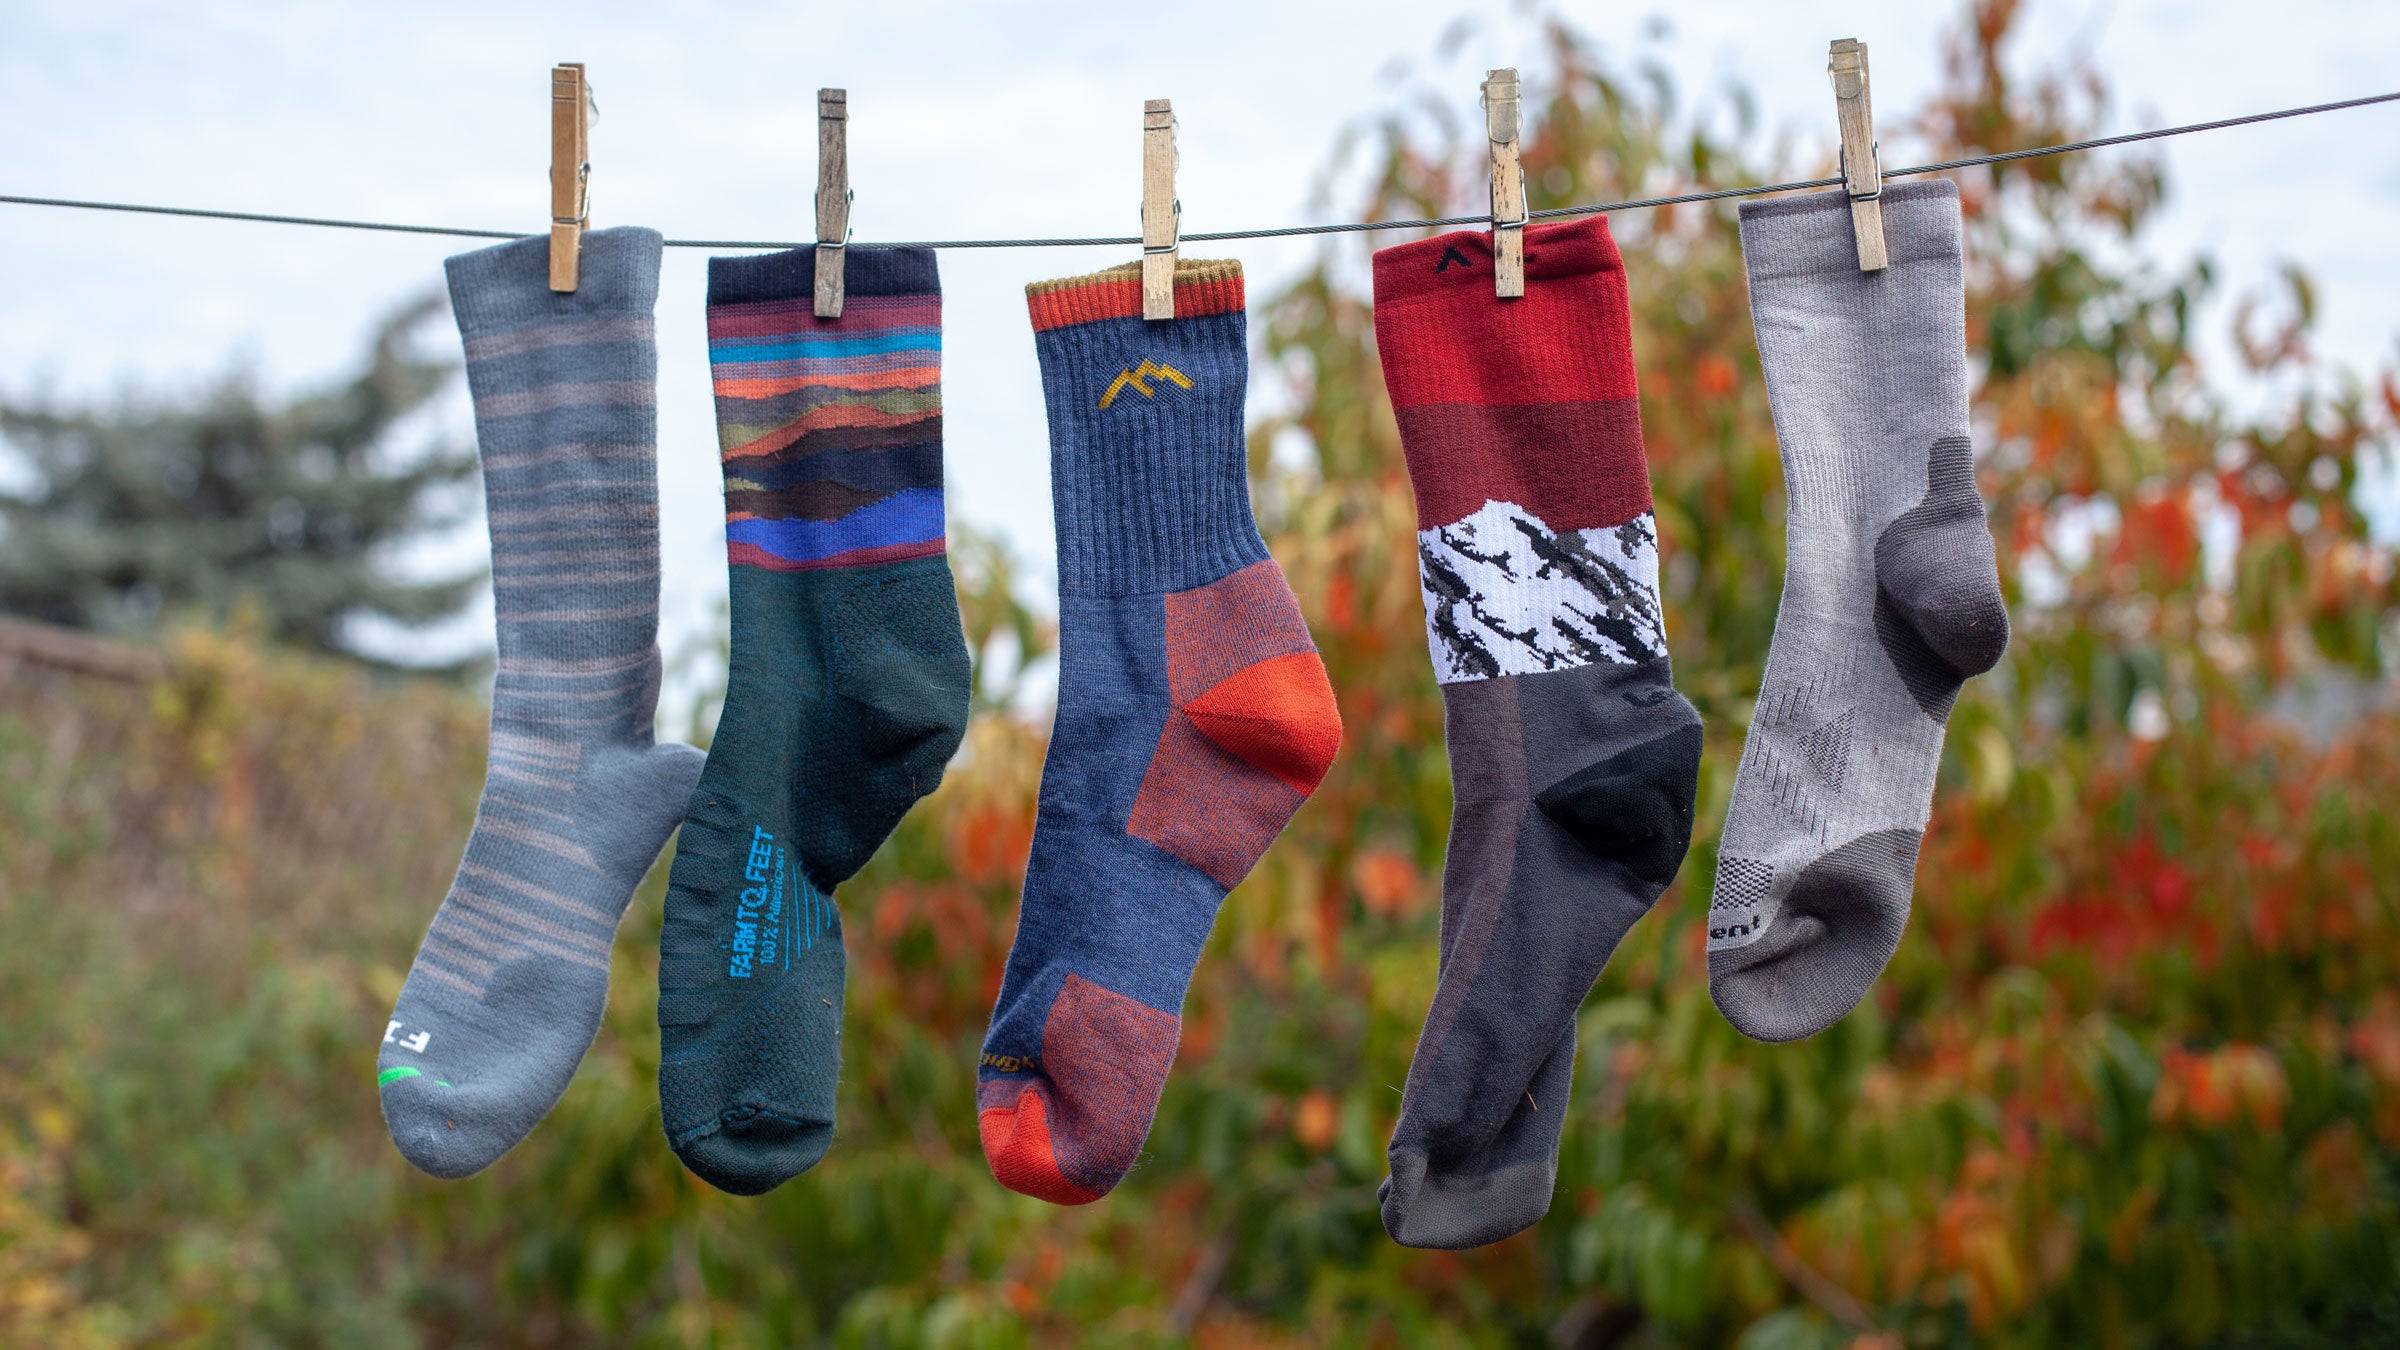 For Bare Feet  Quality Socks for Every Occasion